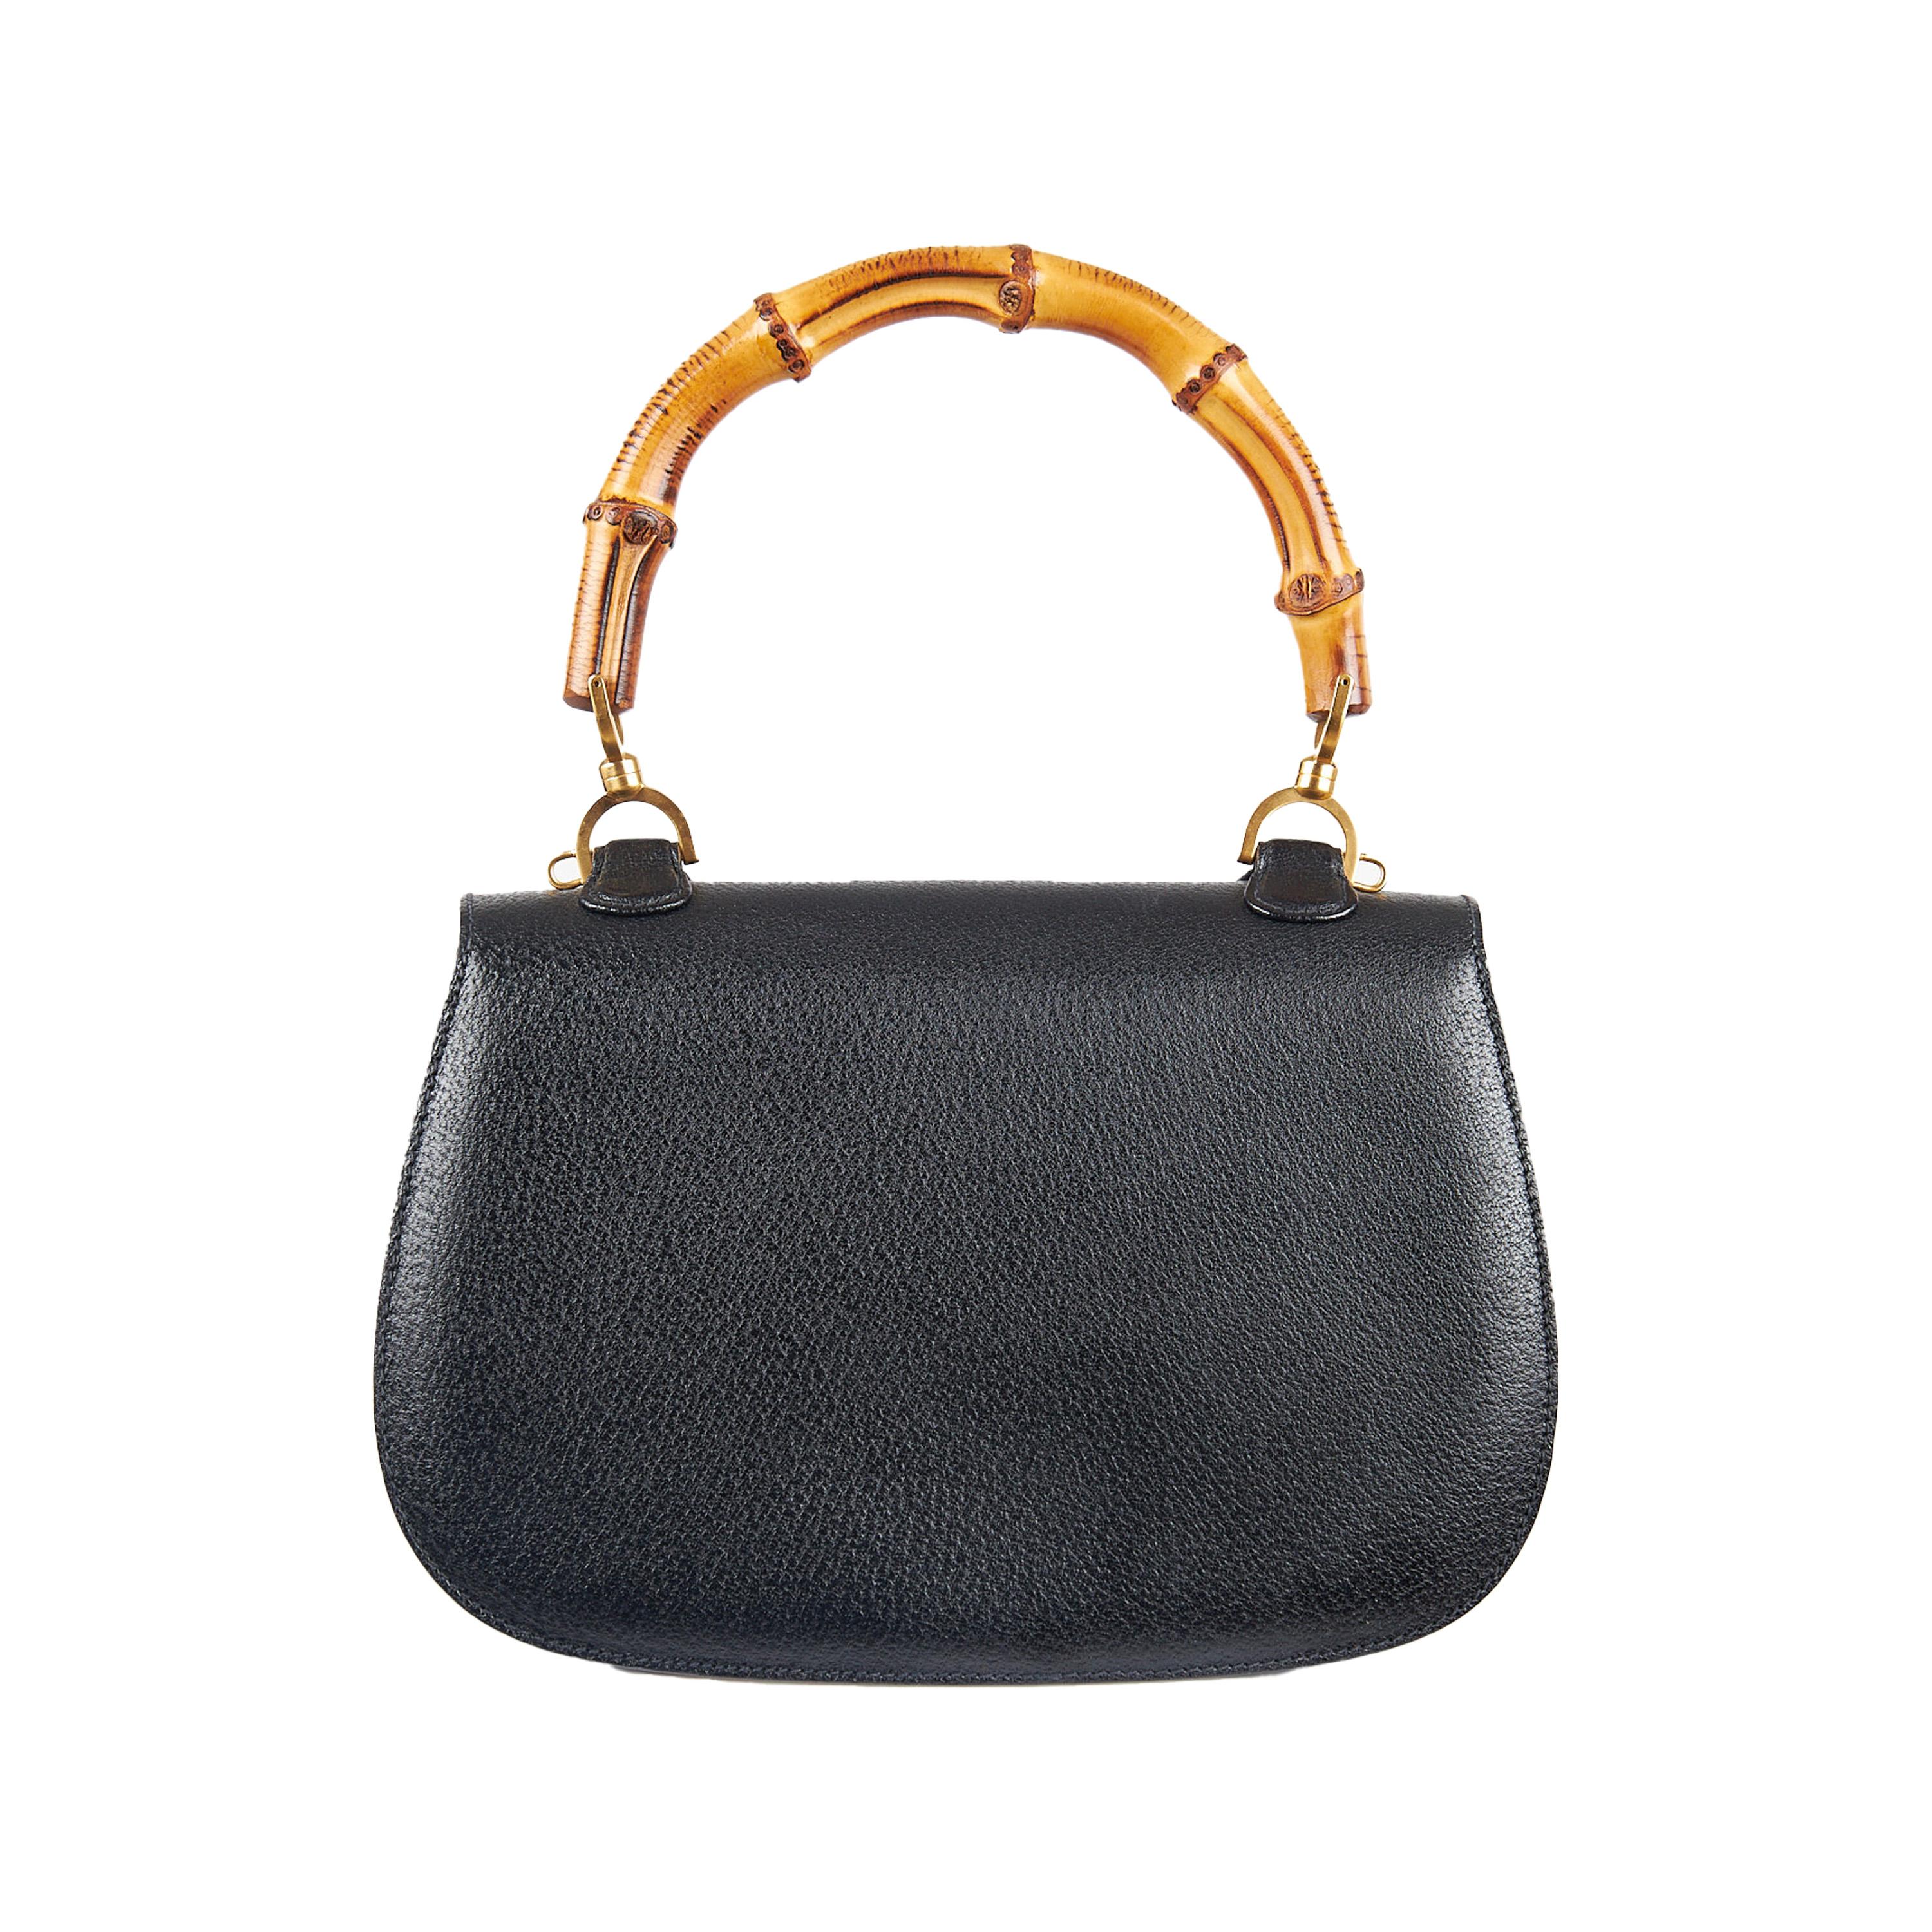 This Gucci 1947 Bamboo Bag is a timeless classic, originally released in the 1940s and re-introduced in the Fall/Winter of 2022 by Alessandro Michele. Crafted in a black calfskin leather matched with brushed golden hardware, it is the perfect